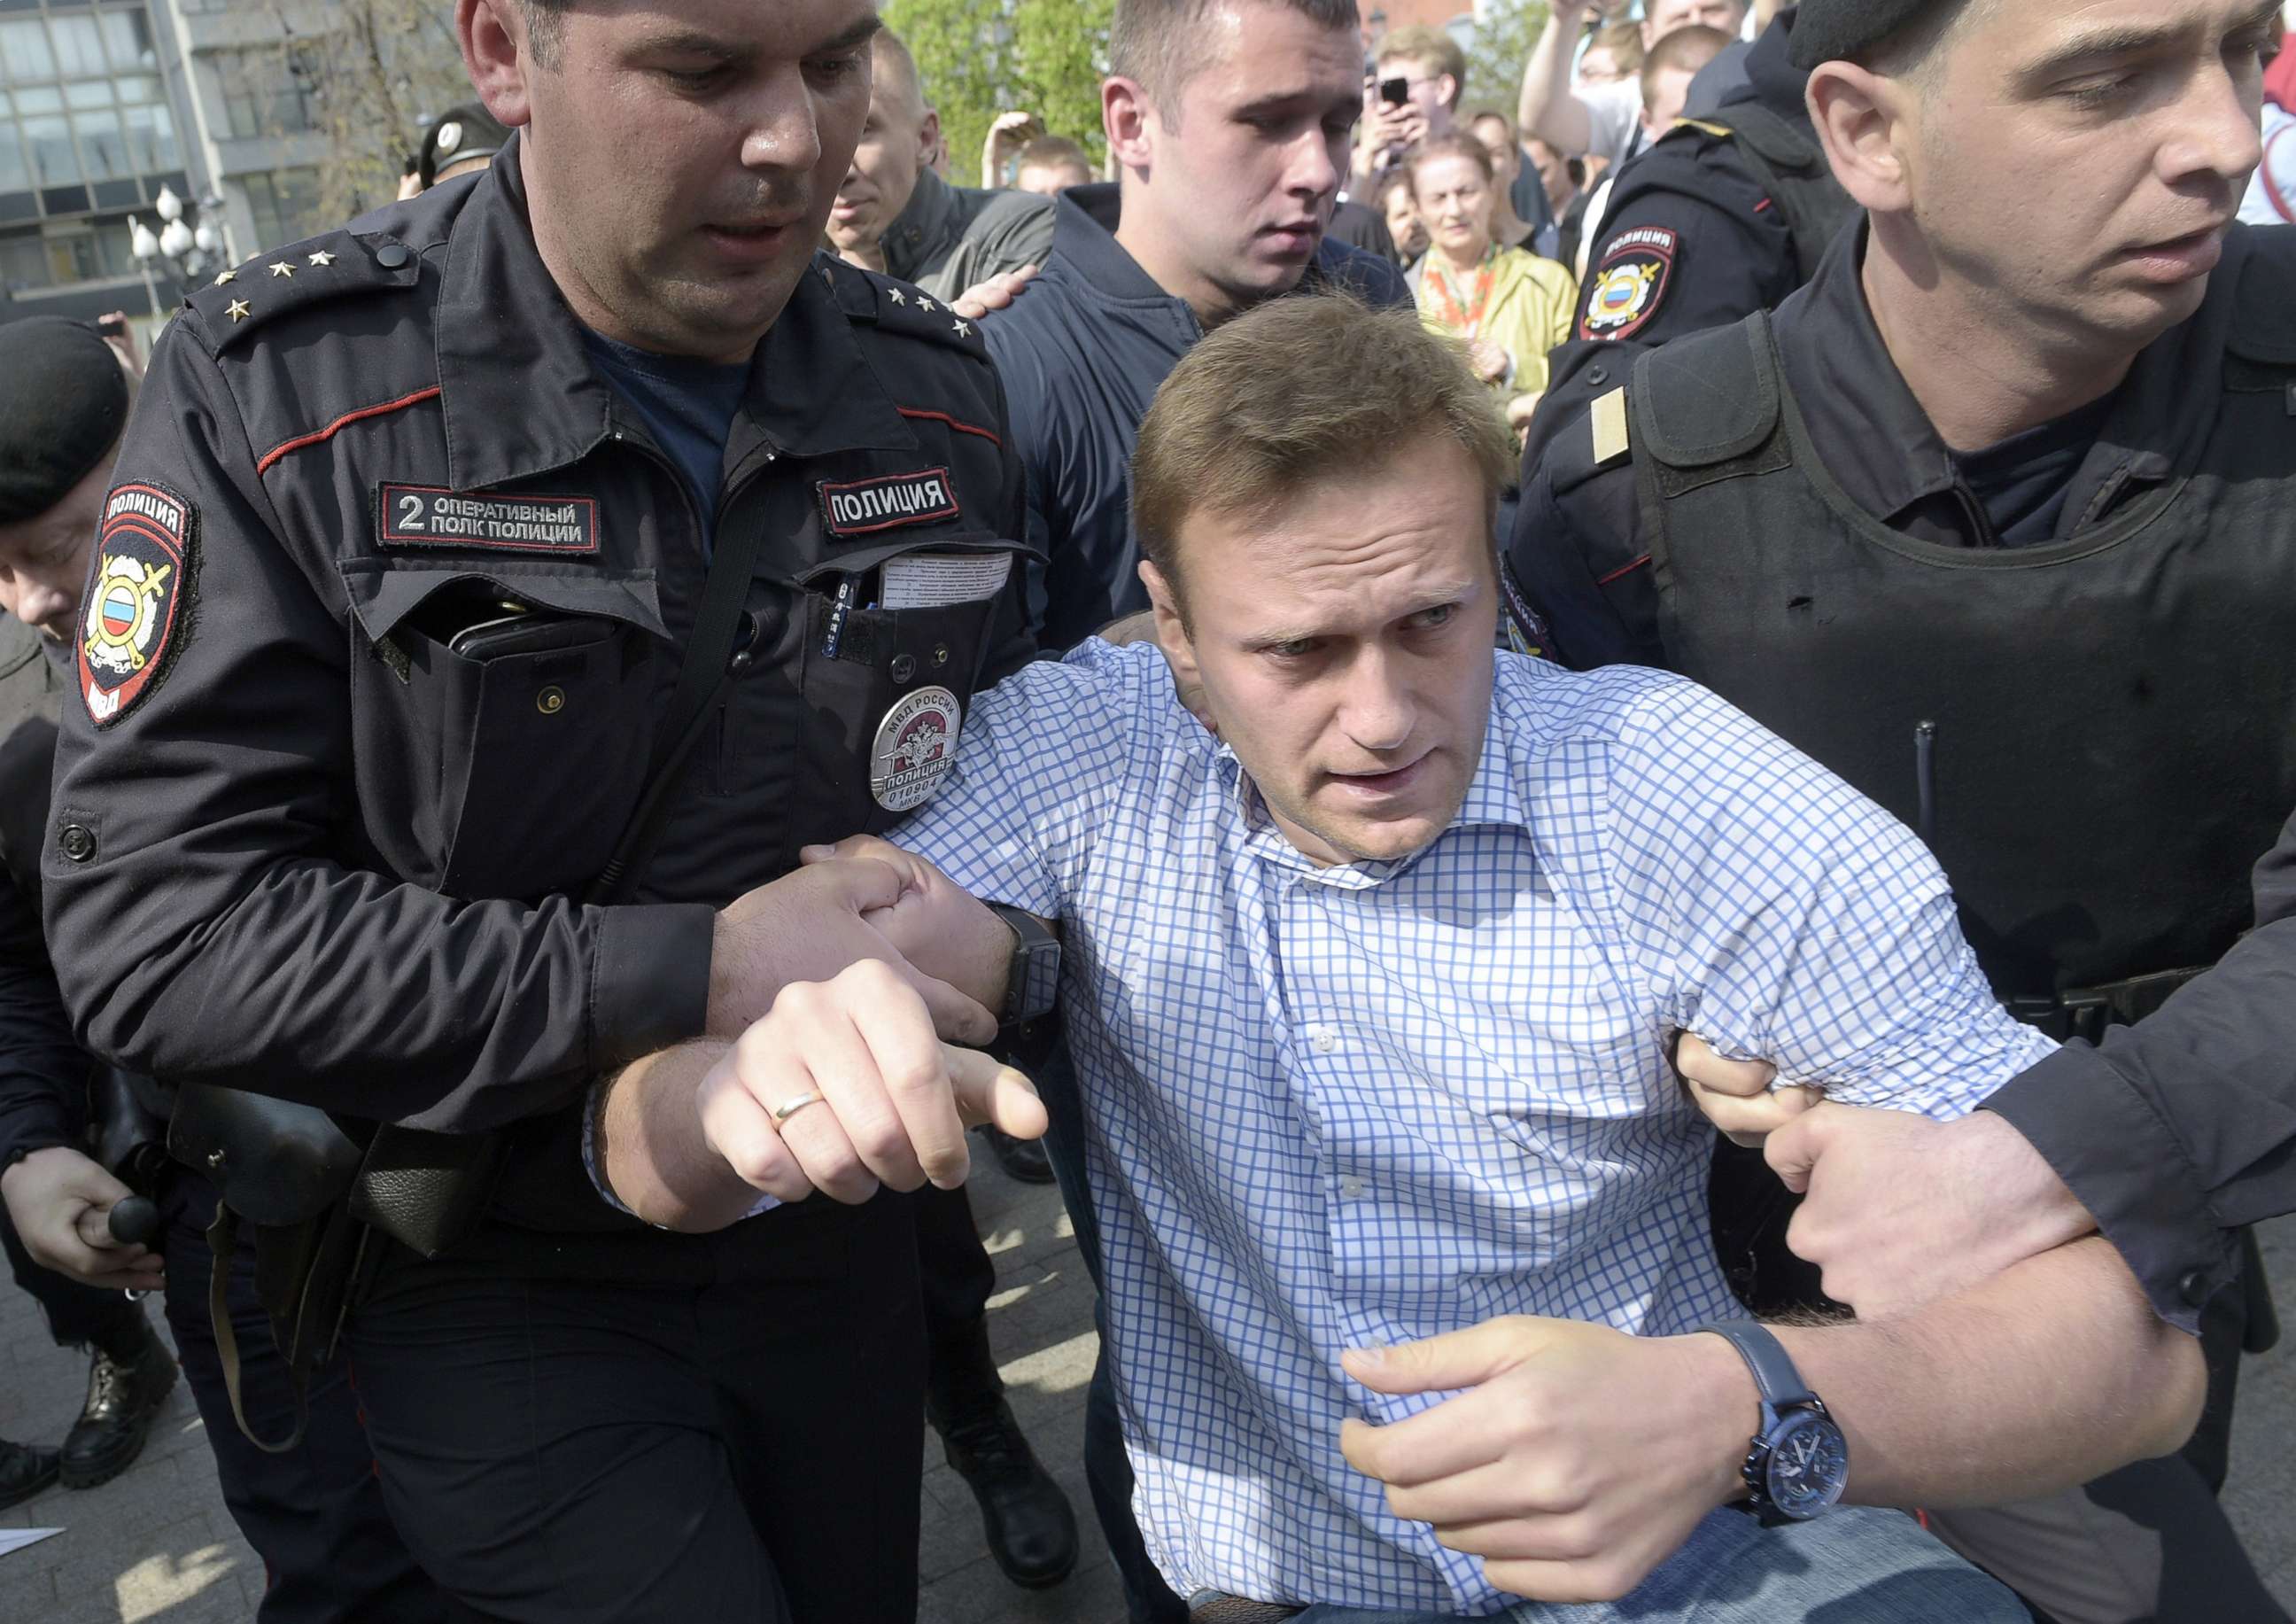 PHOTO: Chairman of the Party "Progress Party" Alexei Navalny (center) is detained during a demonstration against President Vladimir Putin in Moscow, Russia, May 5, 2018.